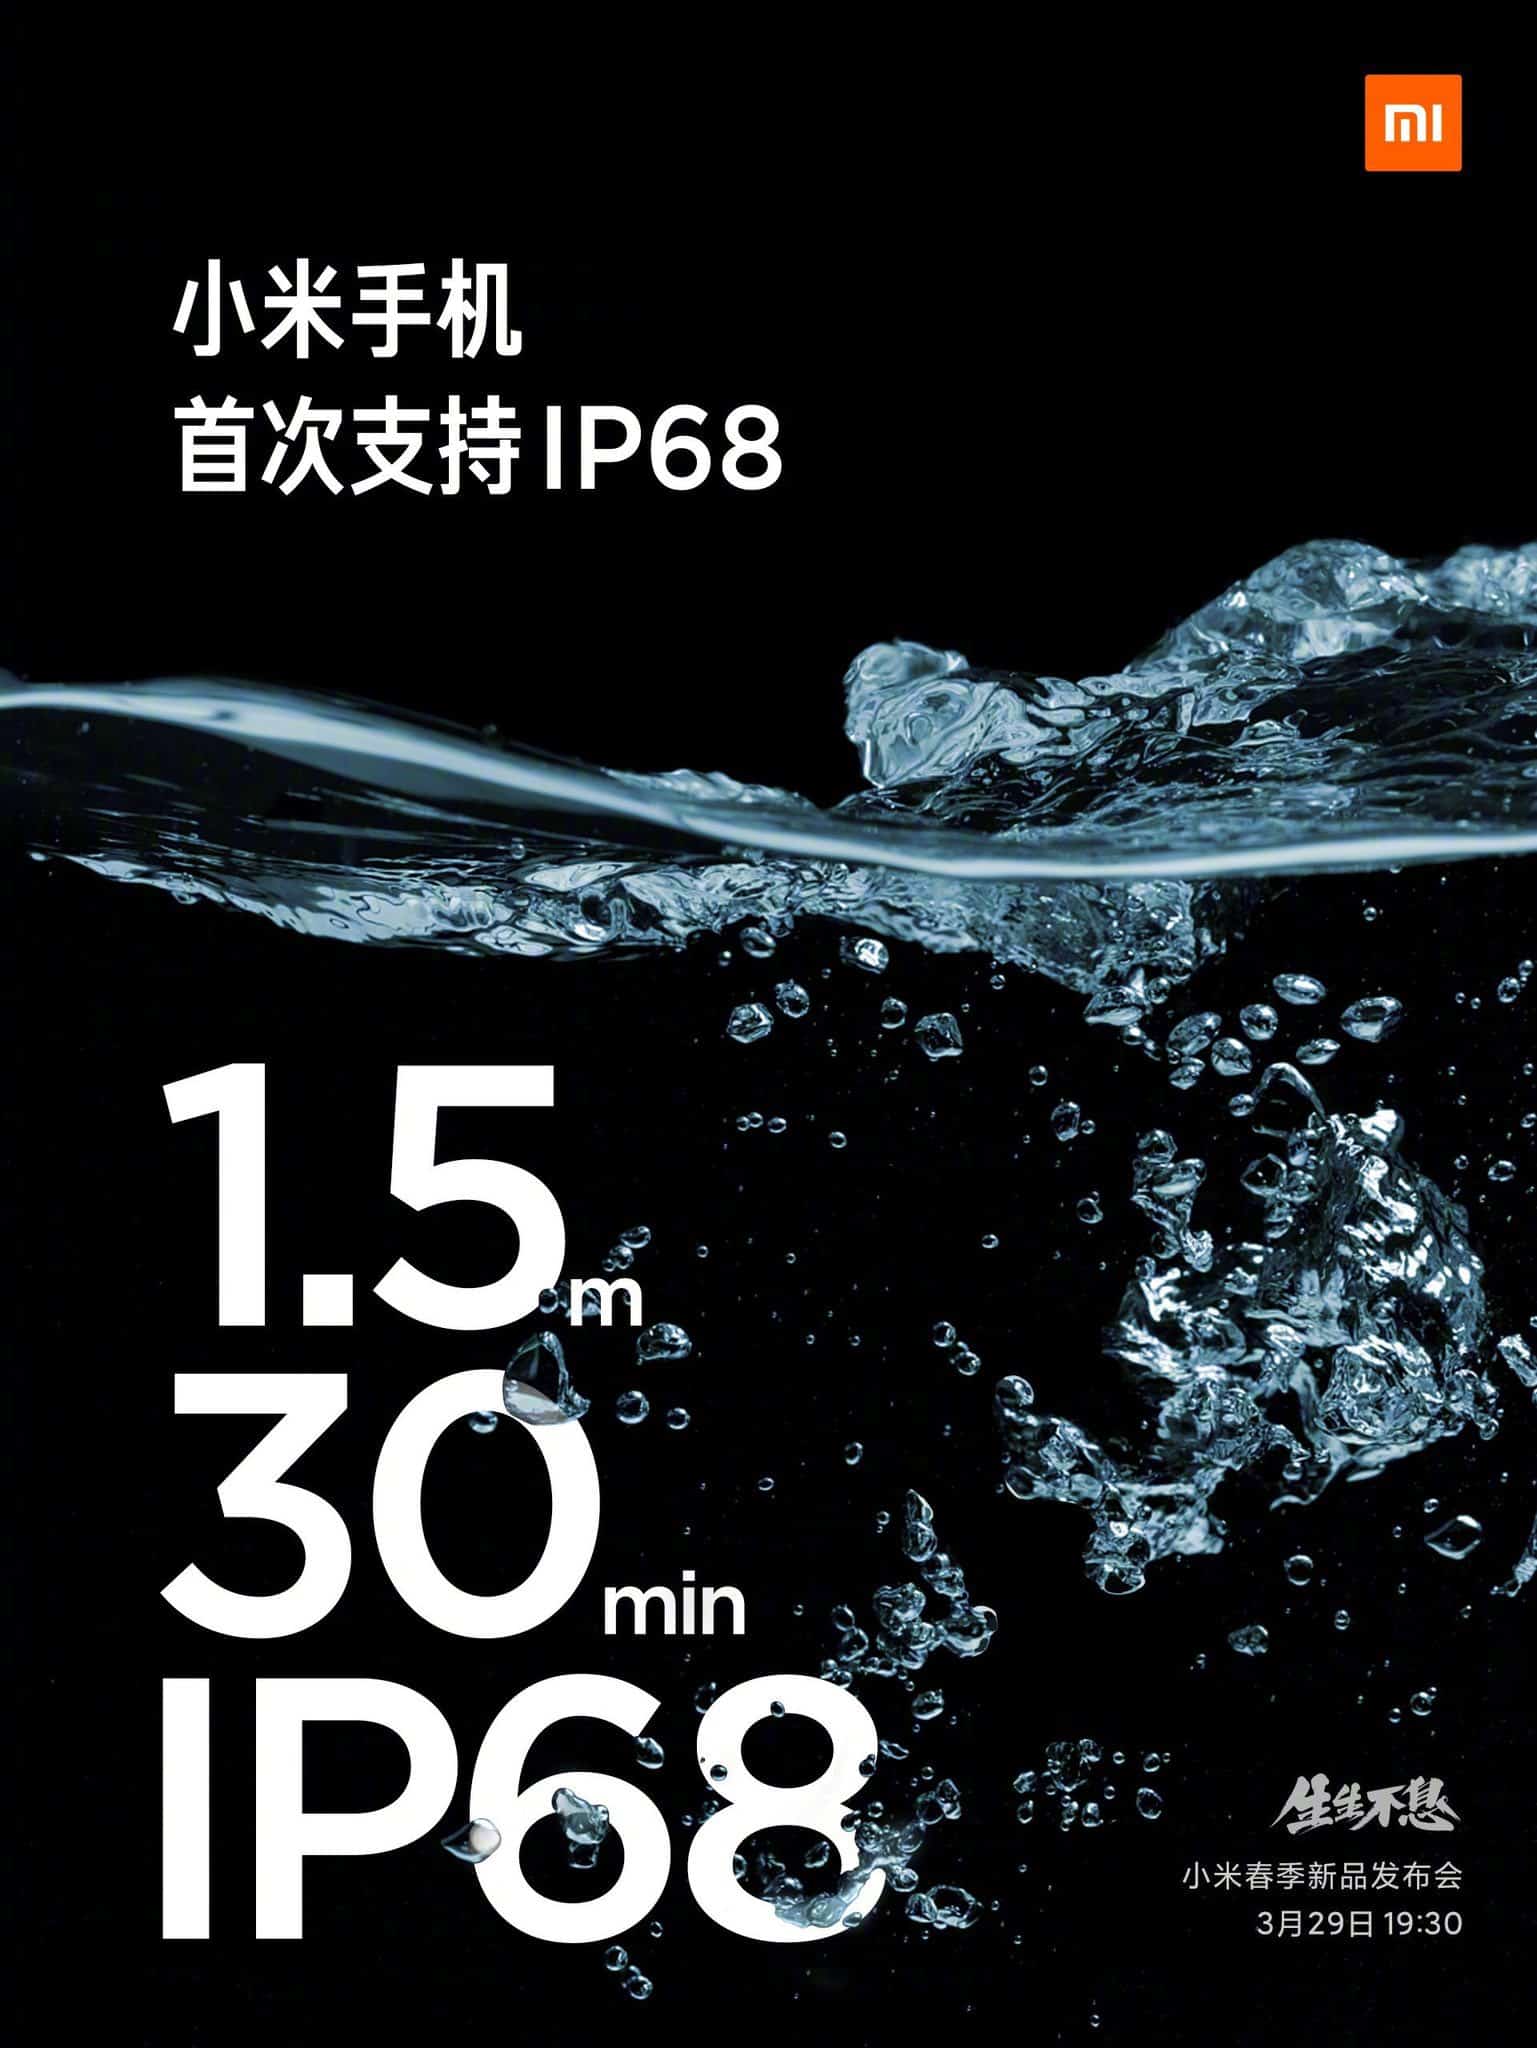 ExjhnnoU4AIGcRe 1 Mi 11 Youth Edition, Mi 11 Pro, and Mi 11 Ultra appears for the last time in official posters ahead of March 29 launch